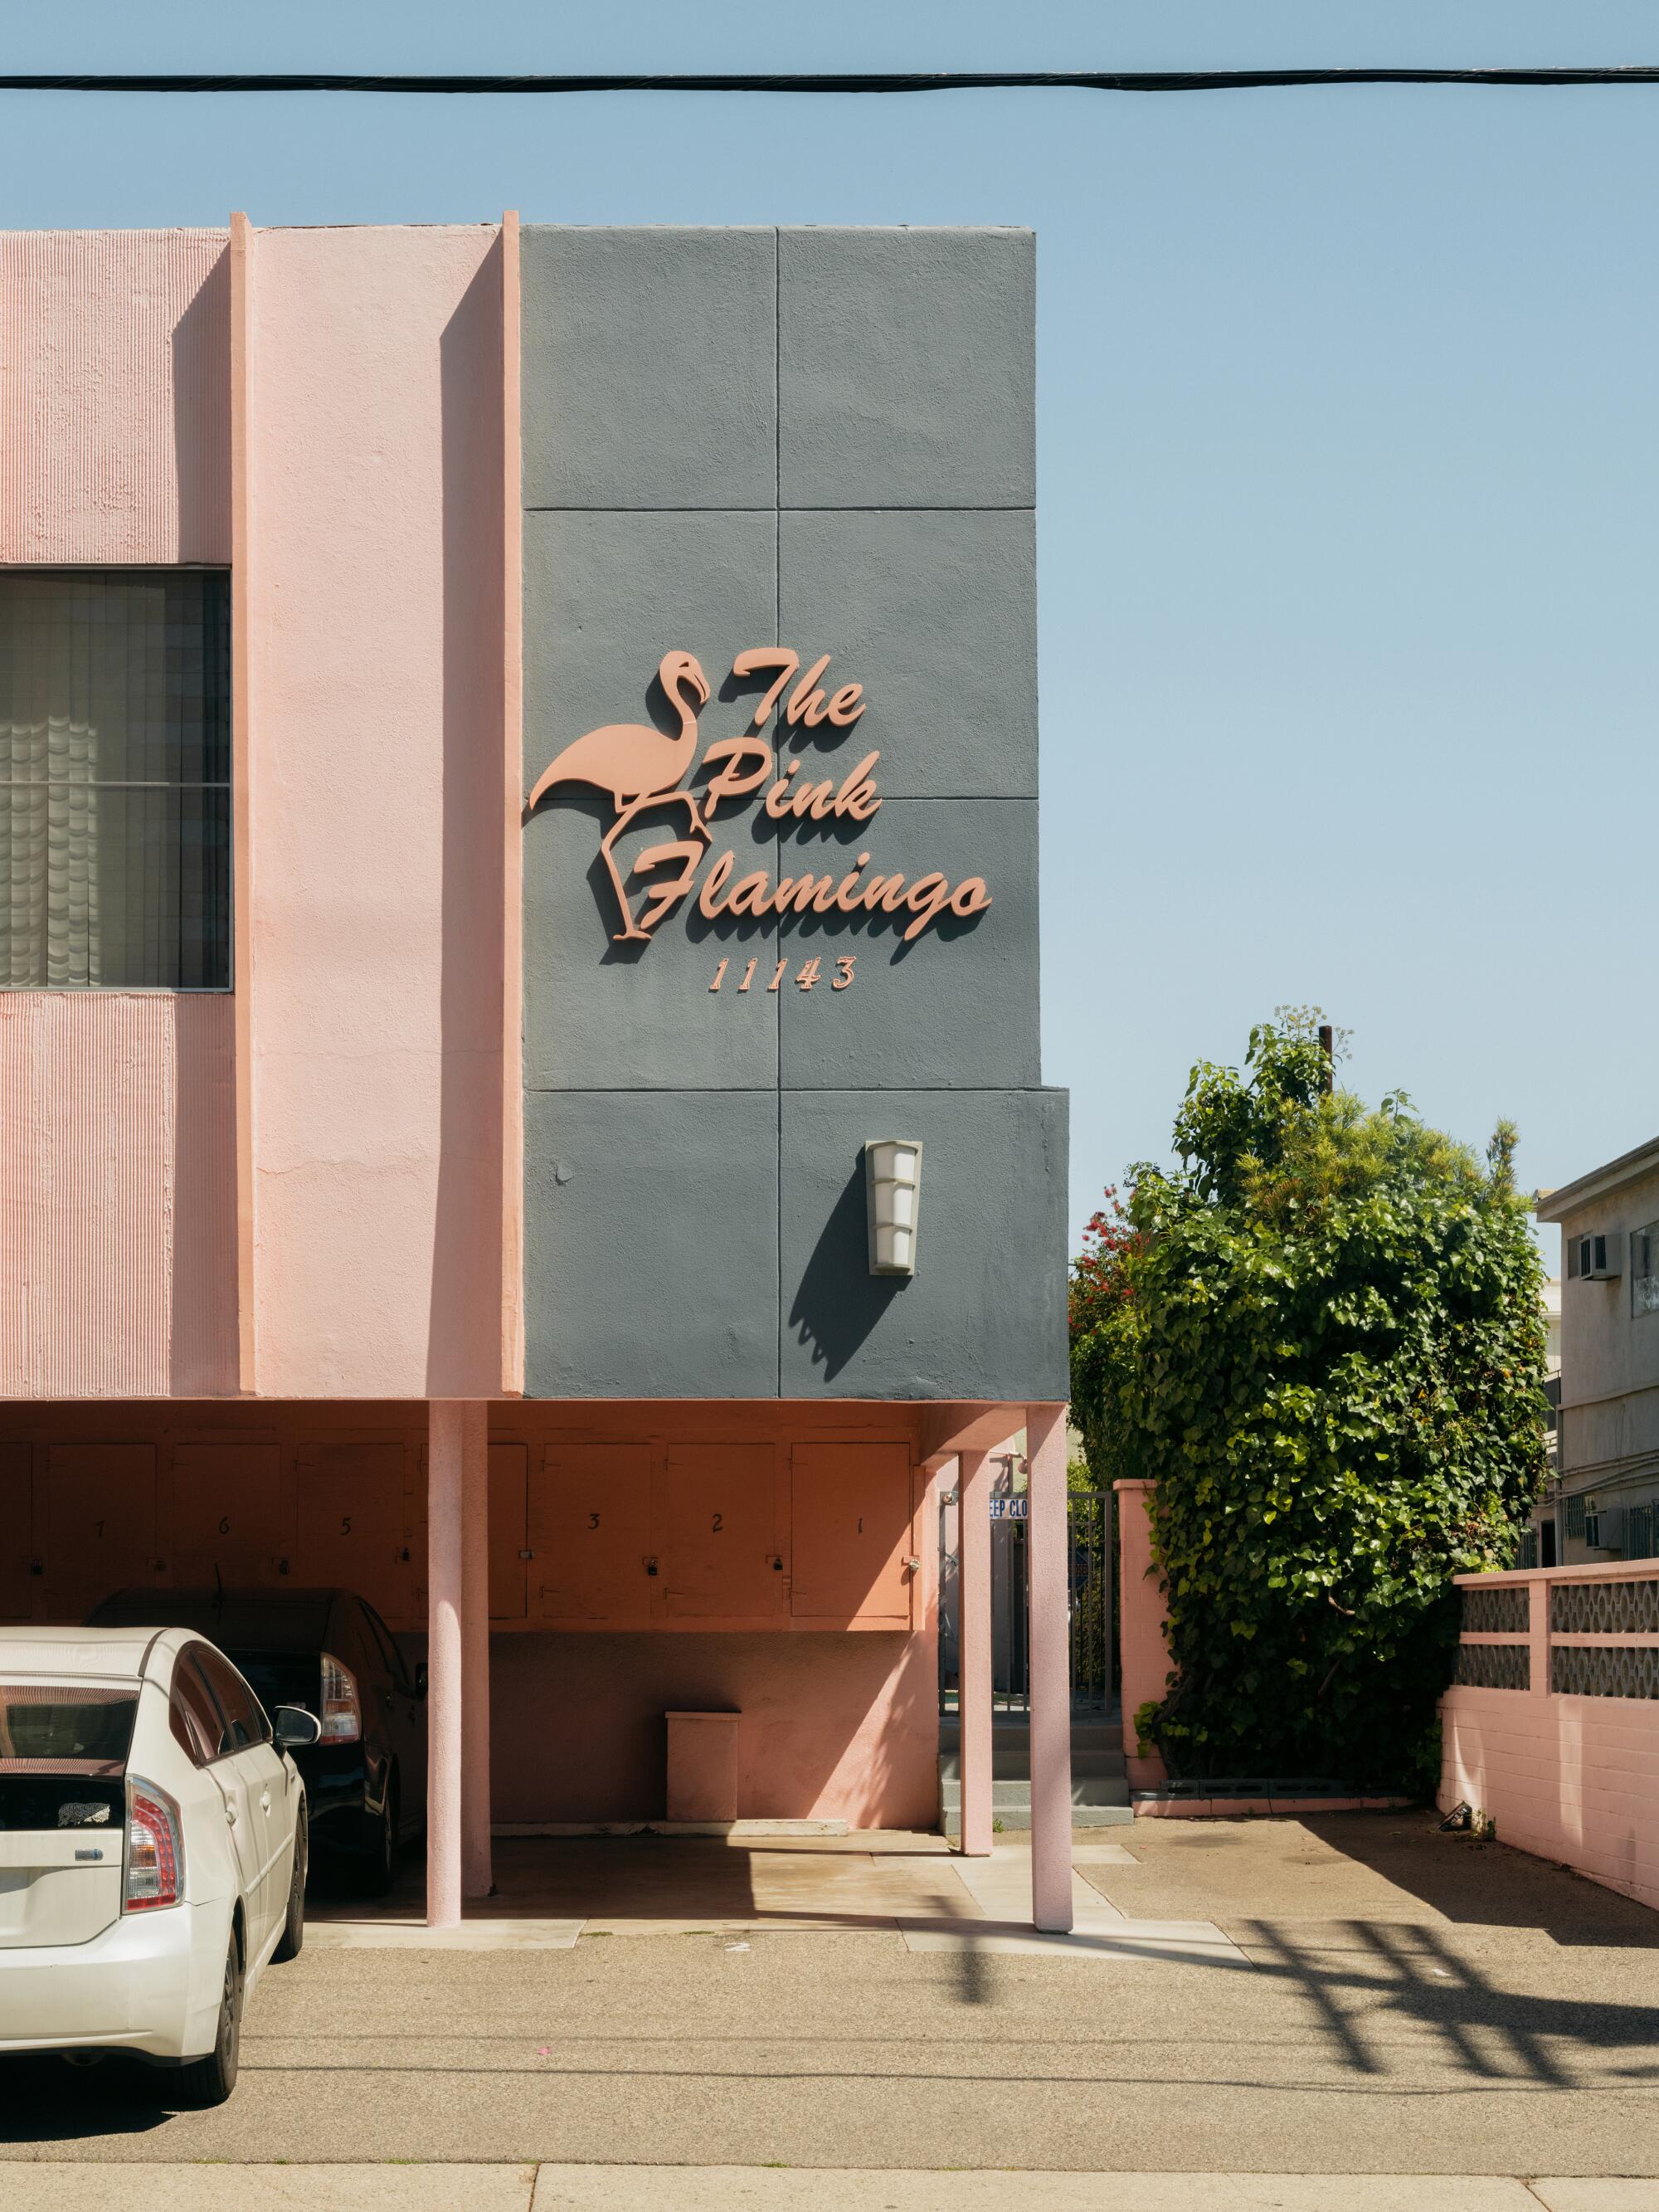 Apartment building sign that reads “The Pink Flamingo 11143”